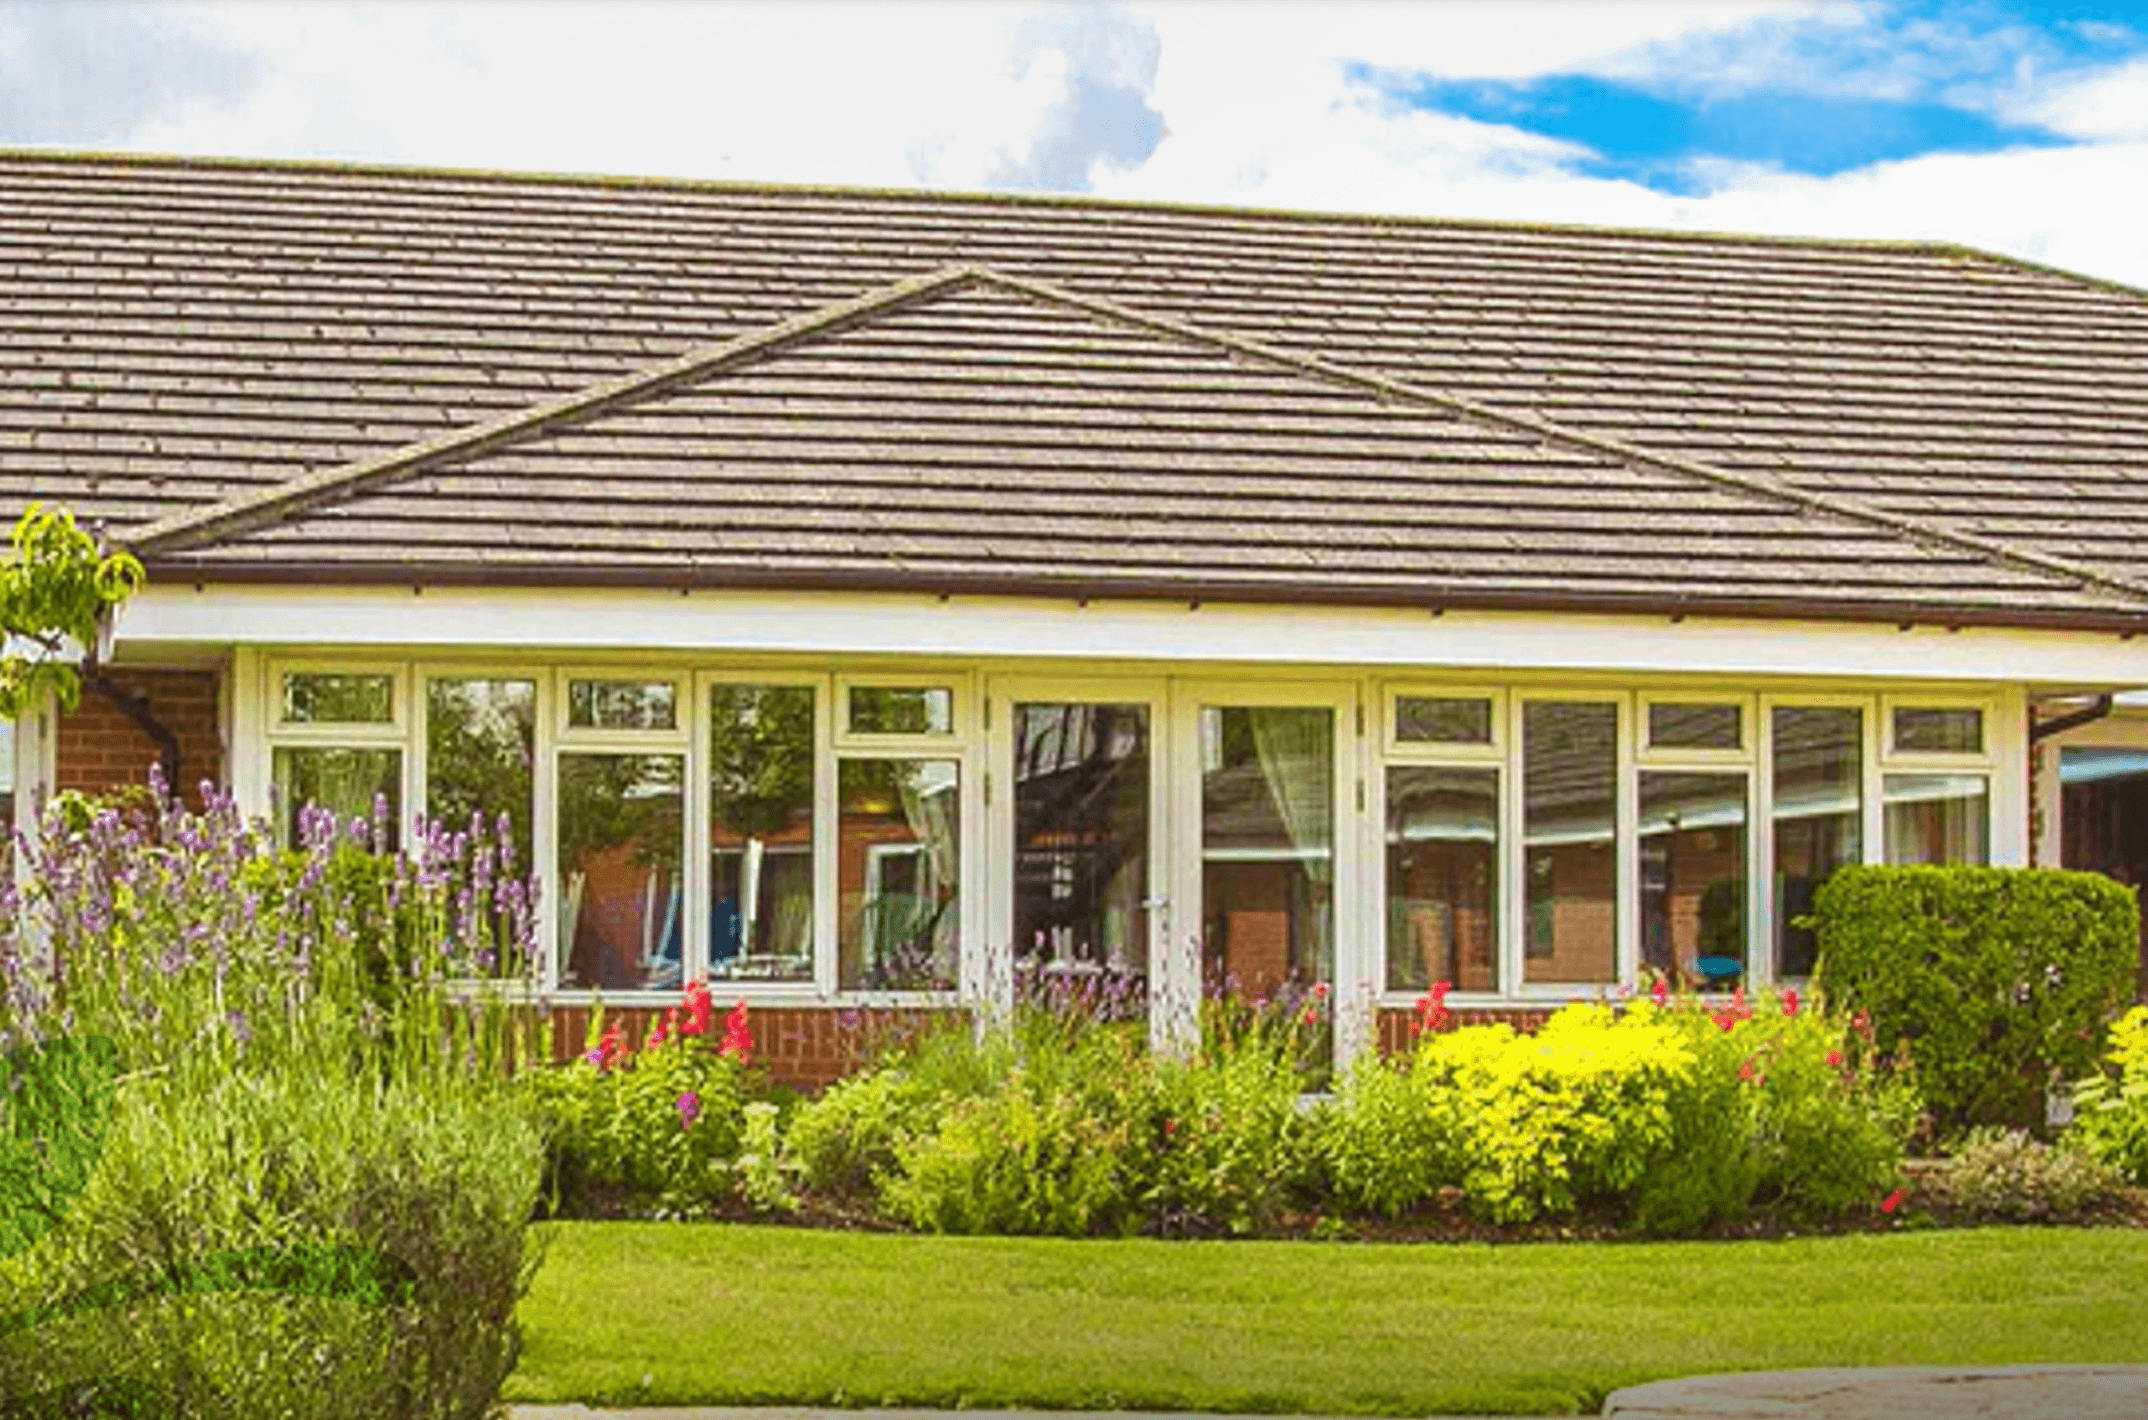 Exterior of Meadow View Nursing Home in Witney, Oxfordshire